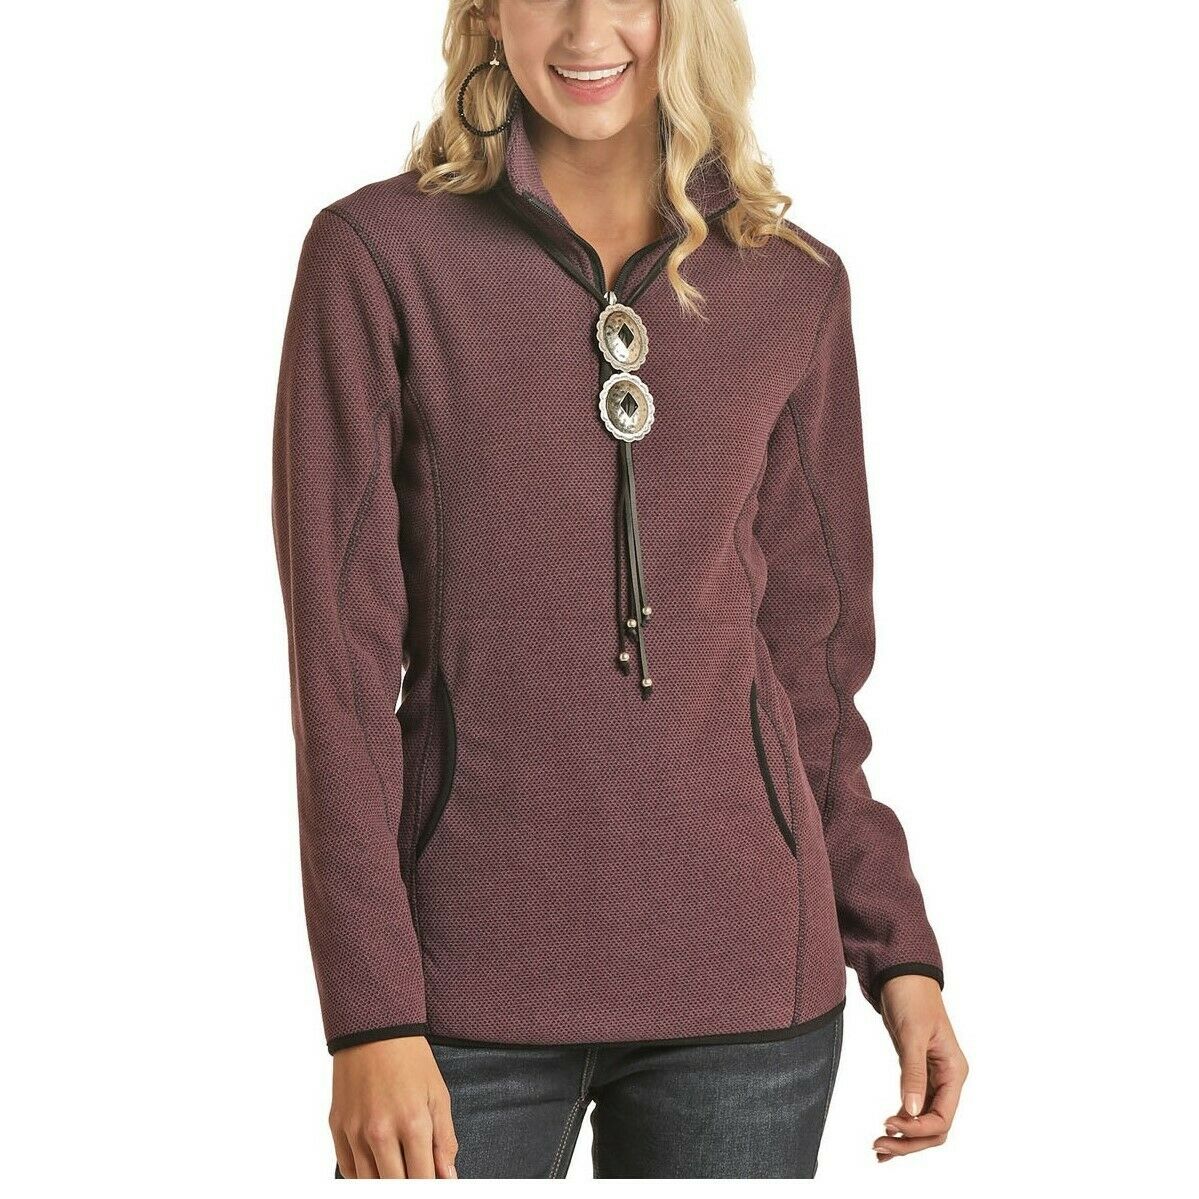 Powder River Outfitter Ladies Maroon Fleece Pullover Jacket 51-6661-60